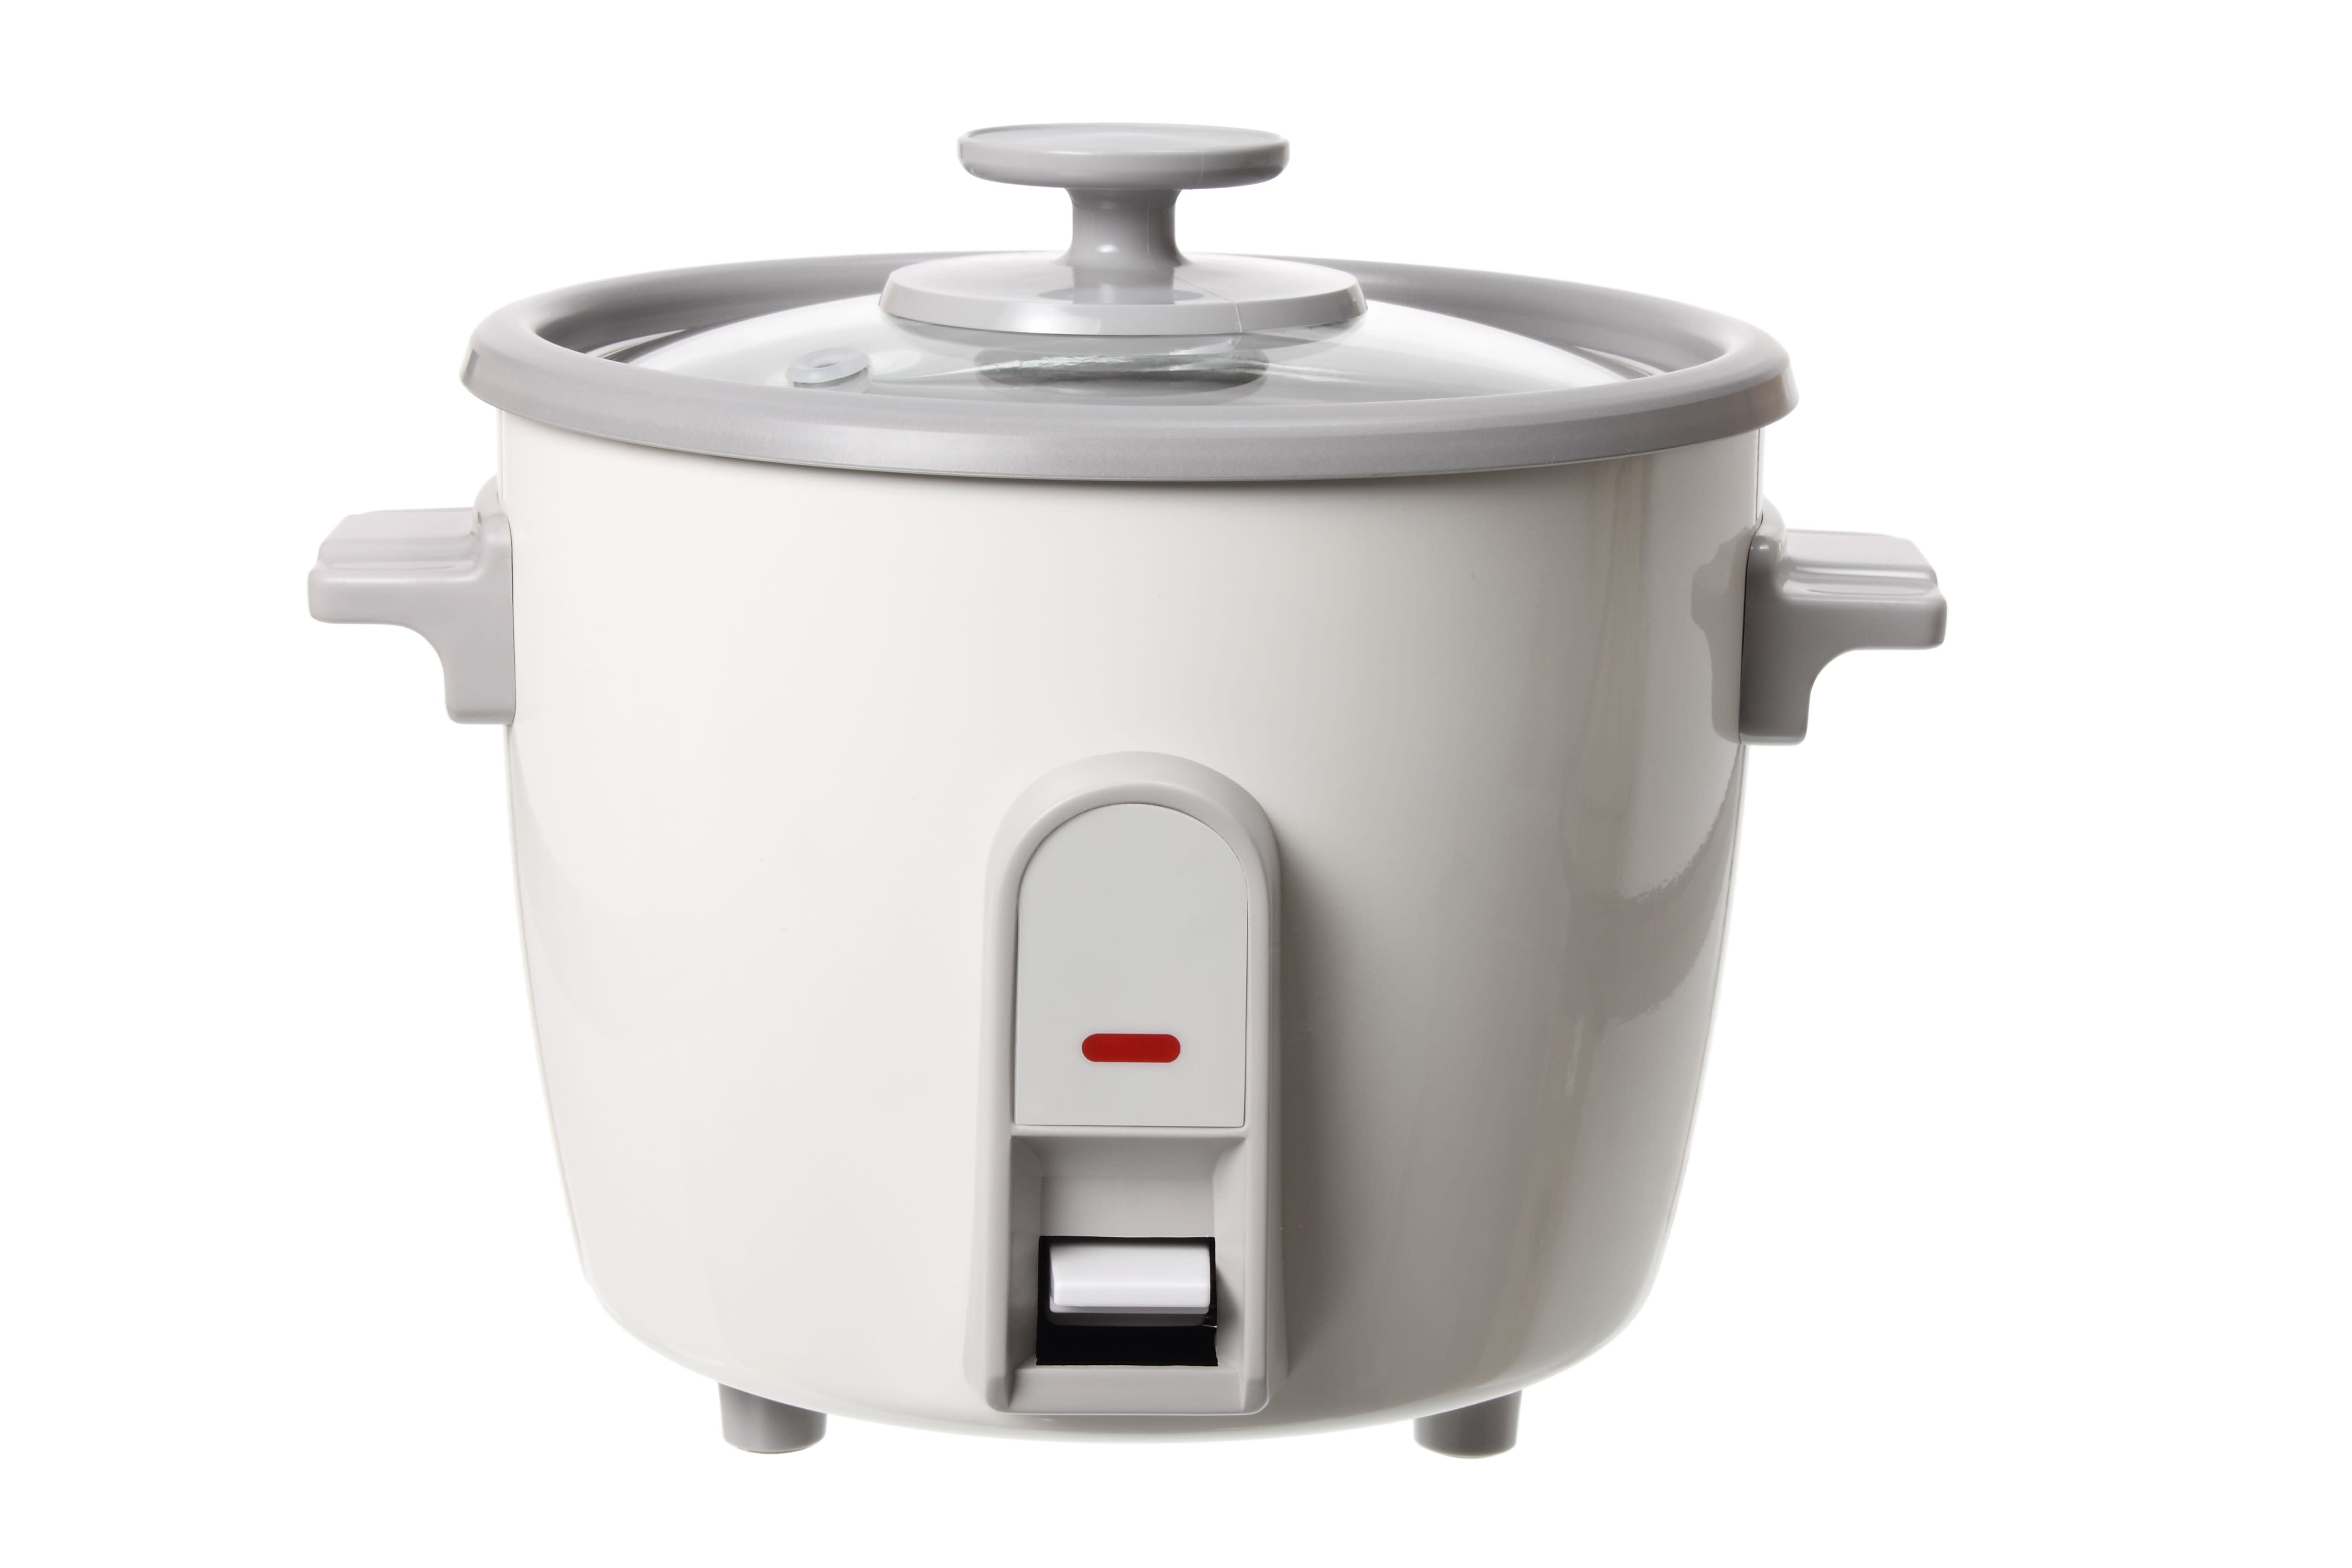 Rice Cookers for sale in San Francisco, California